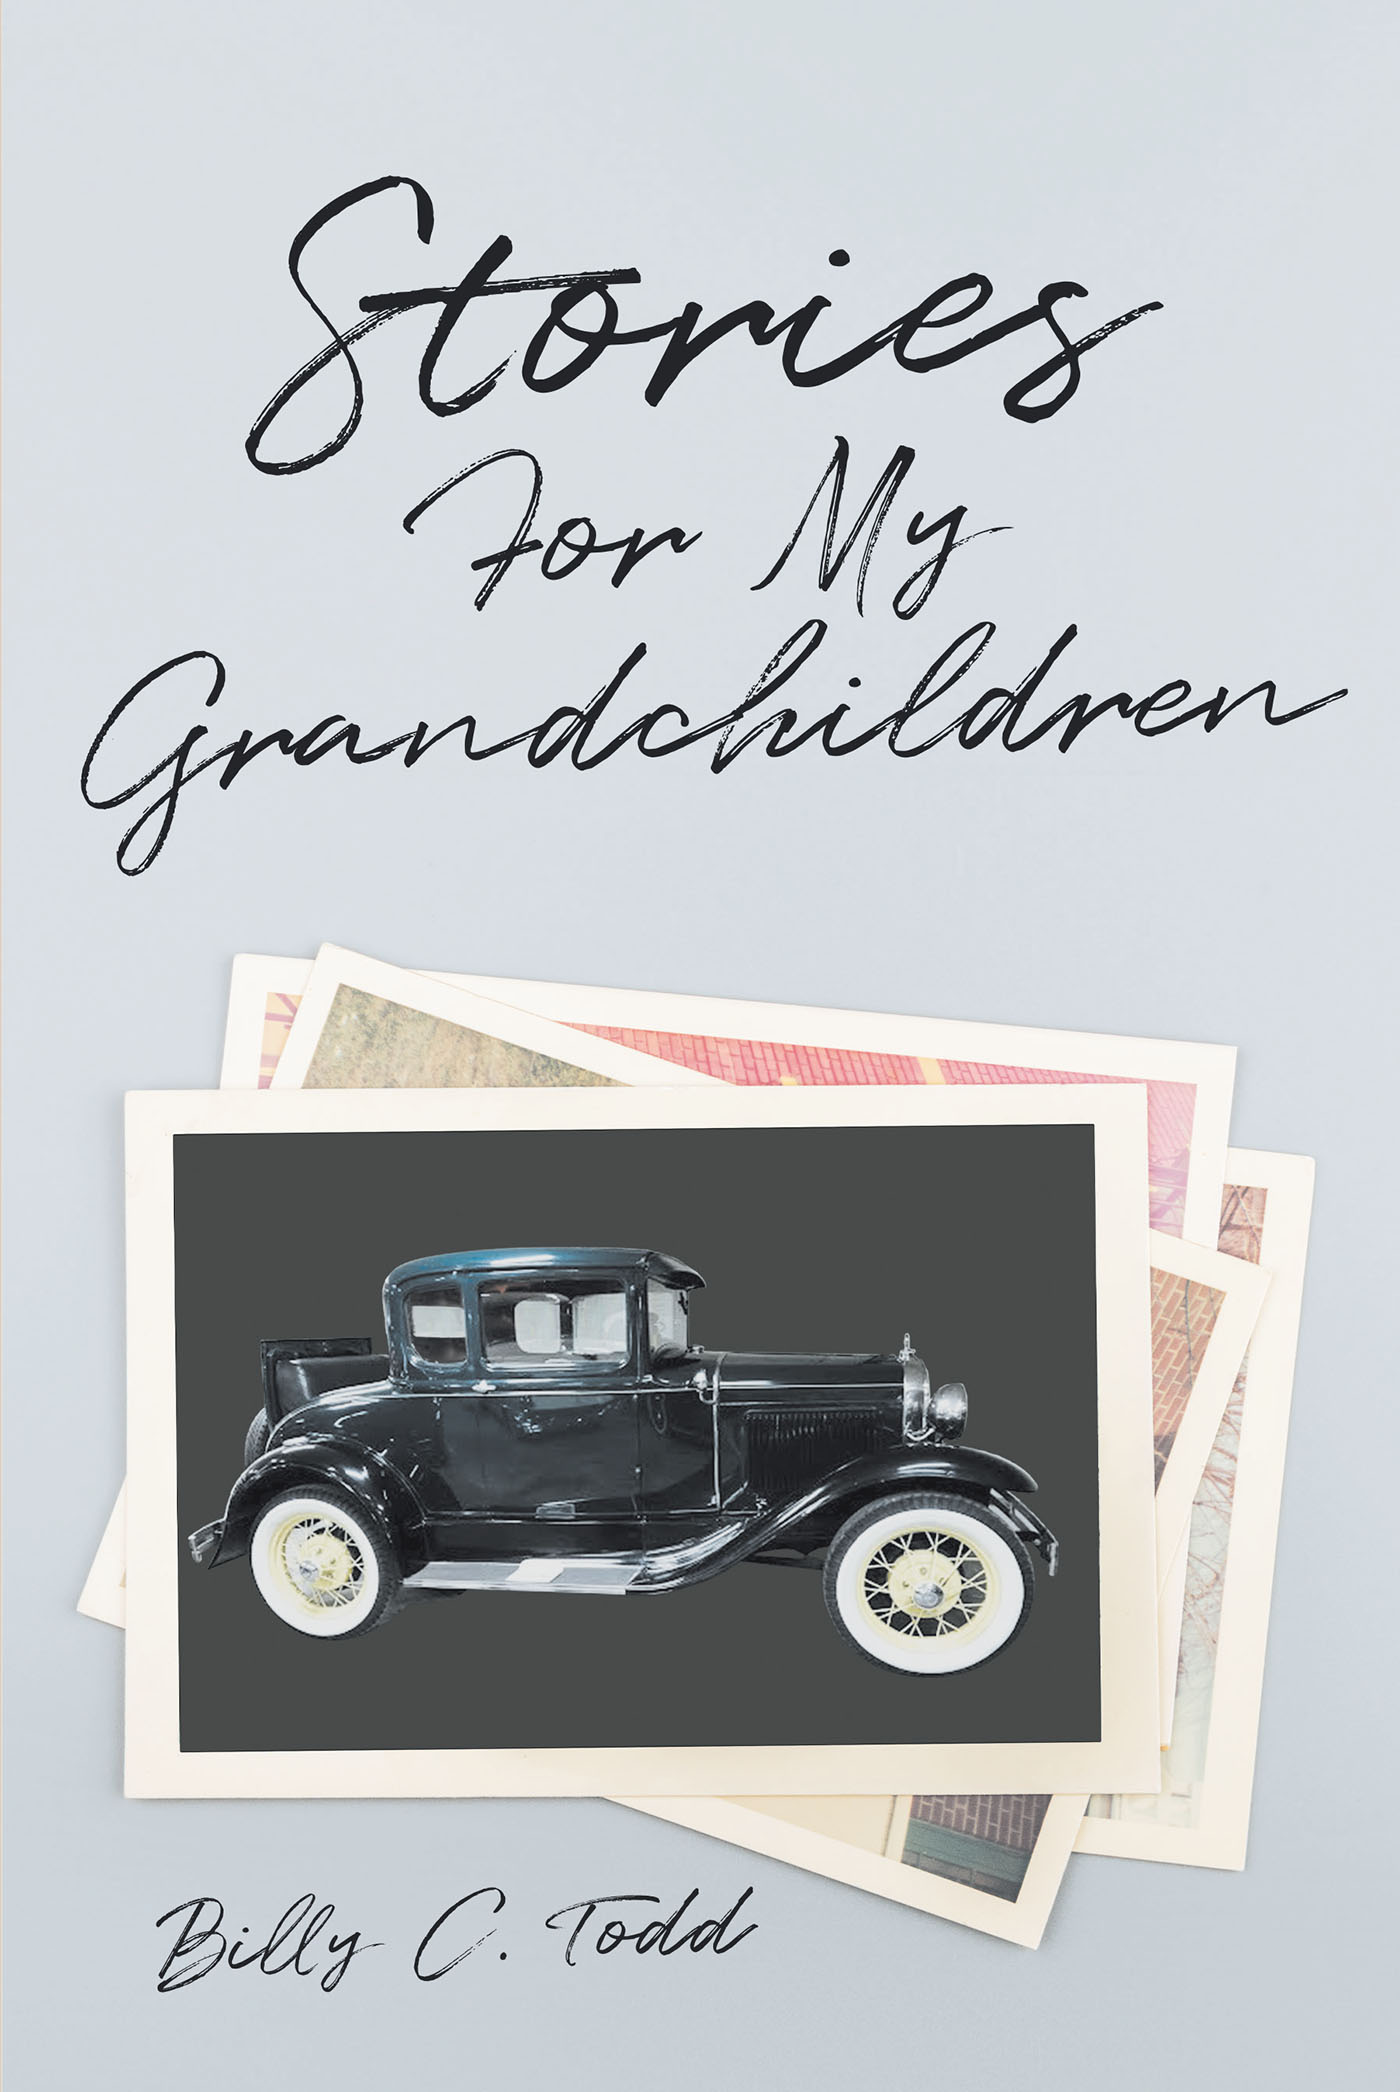 Author Billy C. Todd’s New Book, "Stories For My Grandchildren," is a Heartfelt Collection of Stories That Recount the Author’s Early Life and His Family History